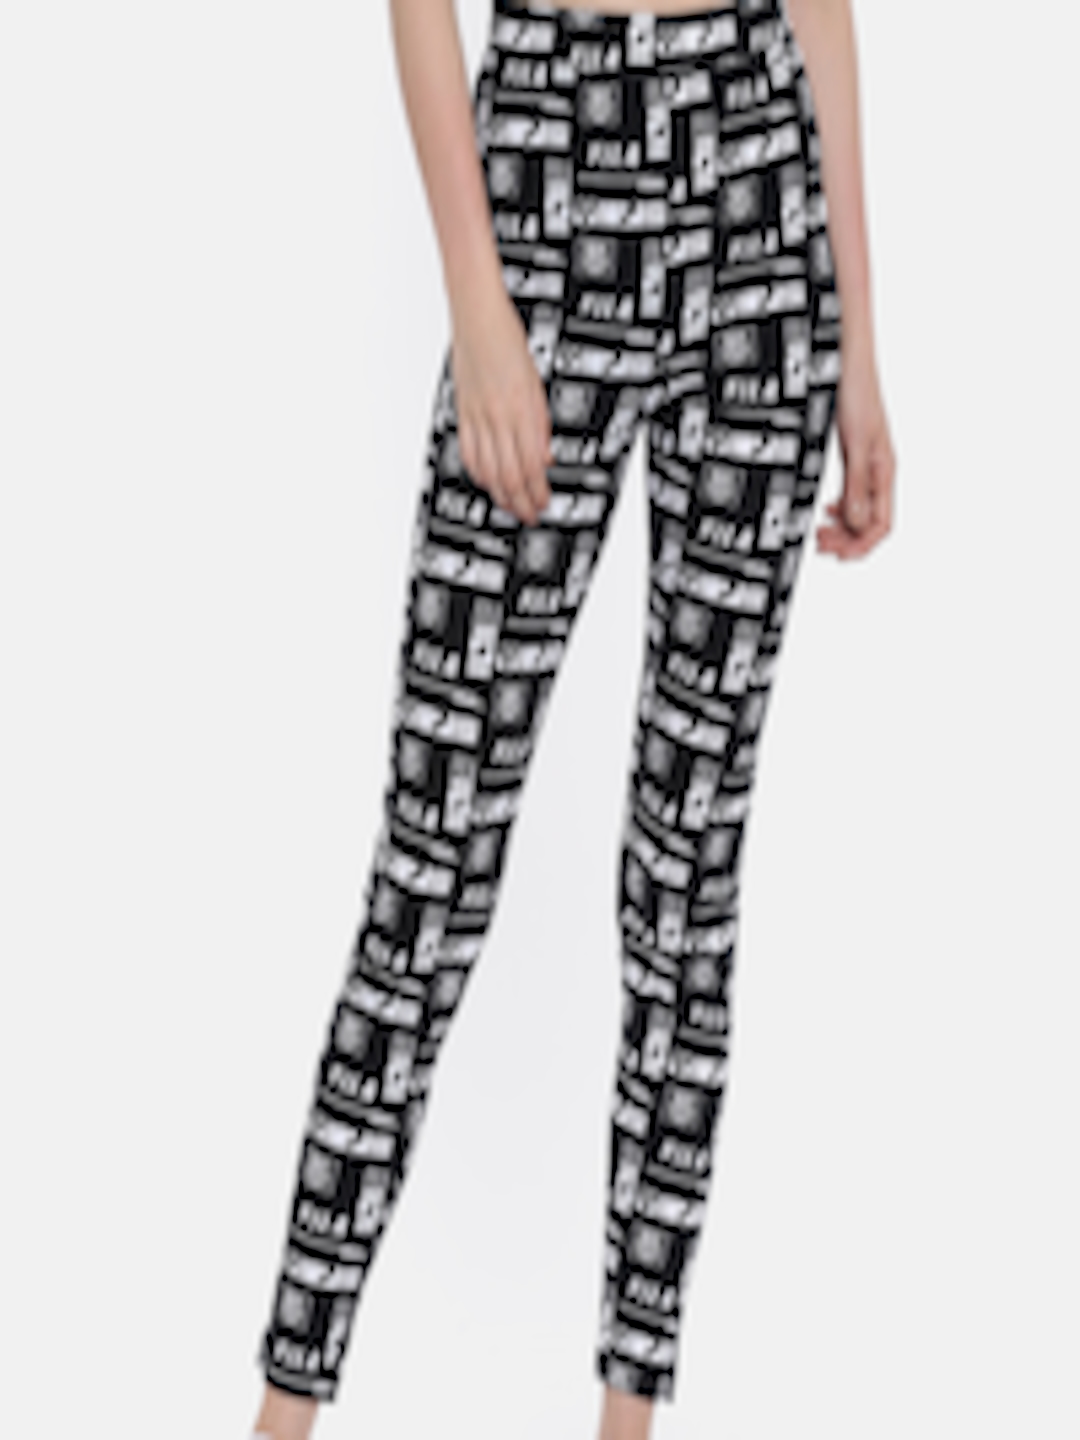 Buy FILA Women Black & White Printed Tights - Tights for Women 2458418 ...